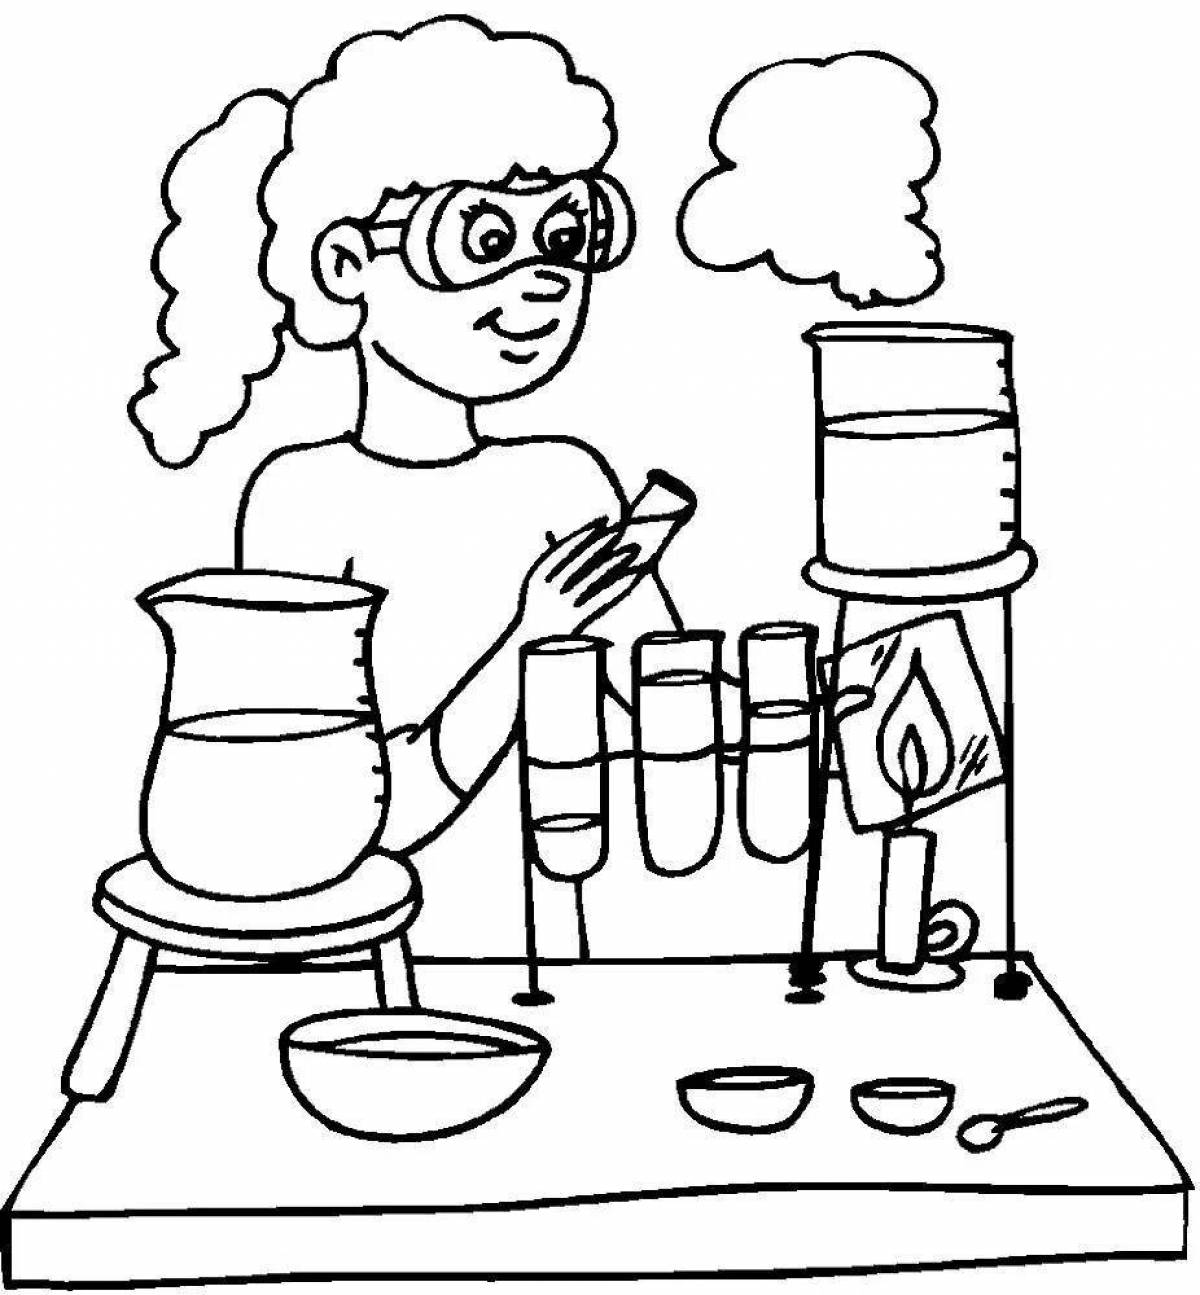 Great science coloring book